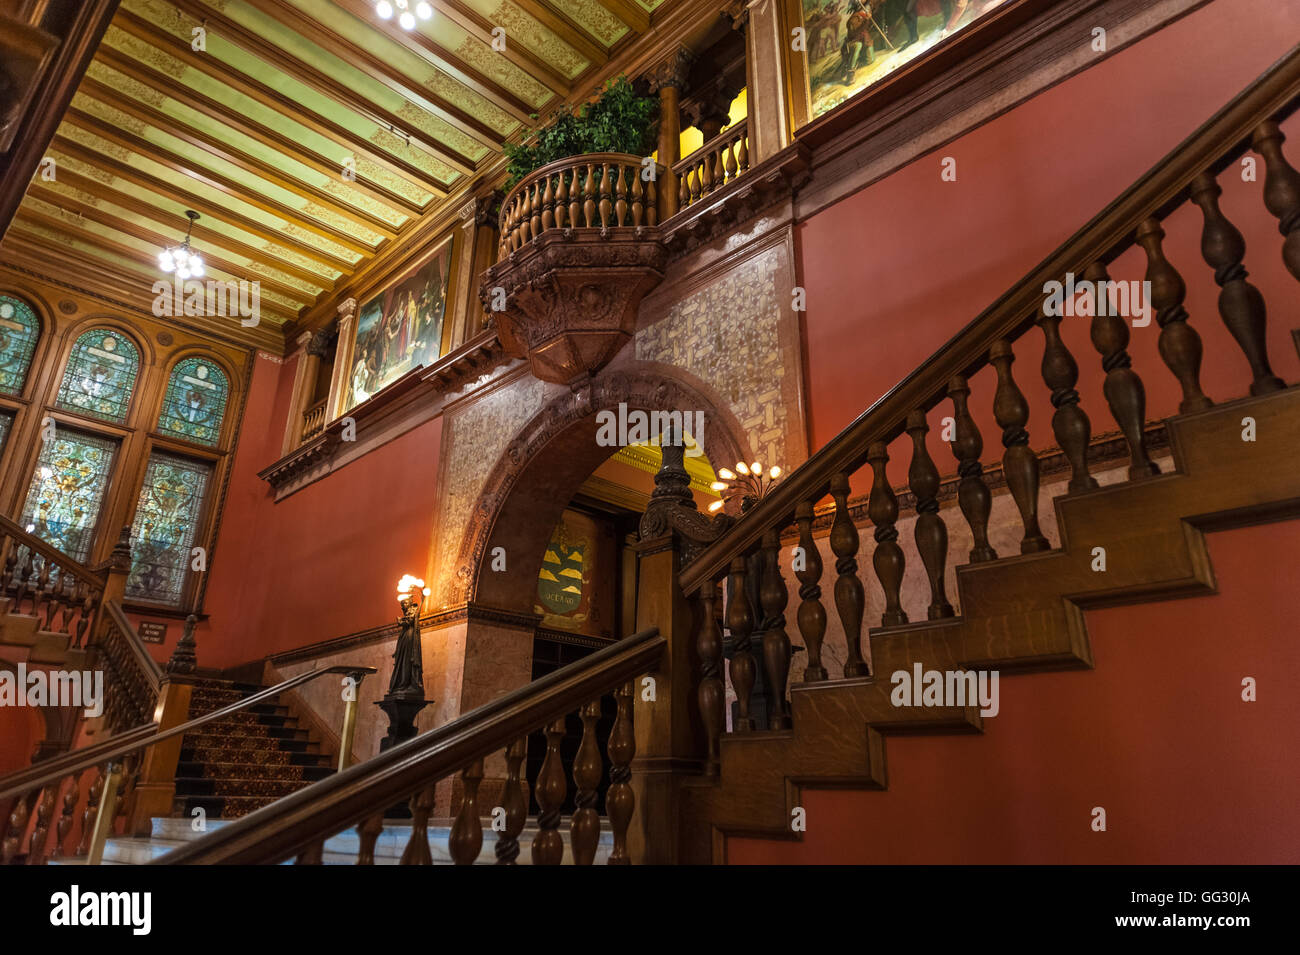 Interior view of historic Flagler College (formerly Ponce de Leon Hotel) in St. Augustine, Florida, USA. Stock Photo